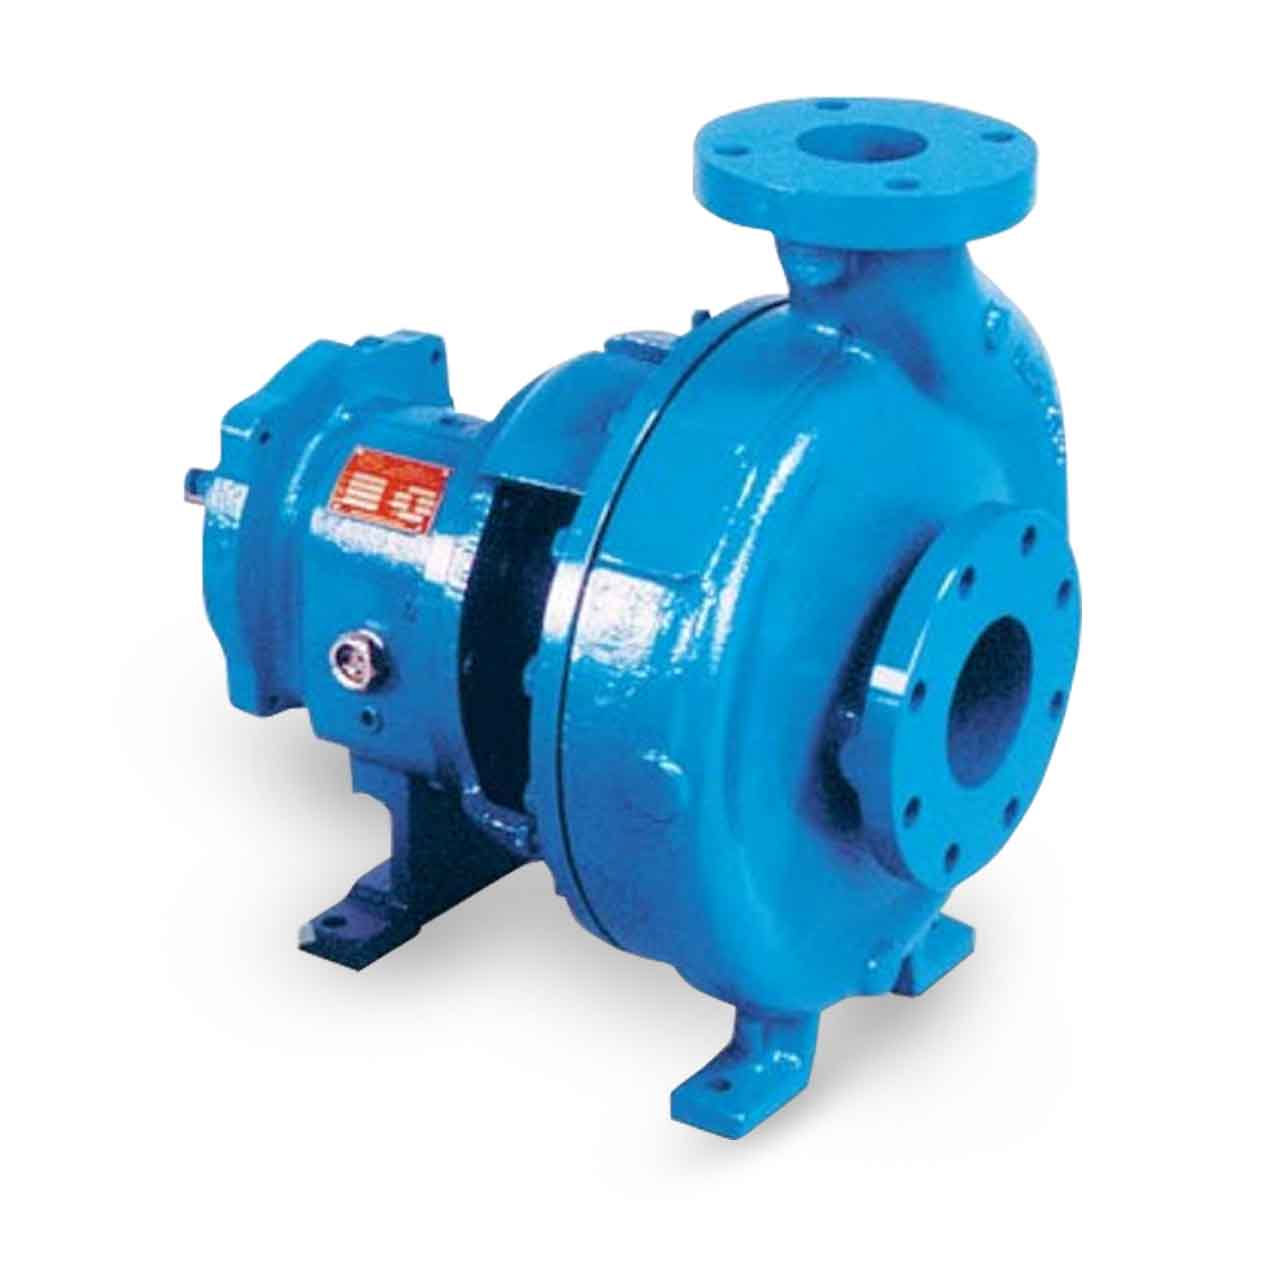 Cast Iron/Steel Barmesa Pumps 60340203 ANSI 911 Series Pumps 10 1 x 2 Model 911M A05 ANSI Ductile Iron Material with 316 SS impeller 